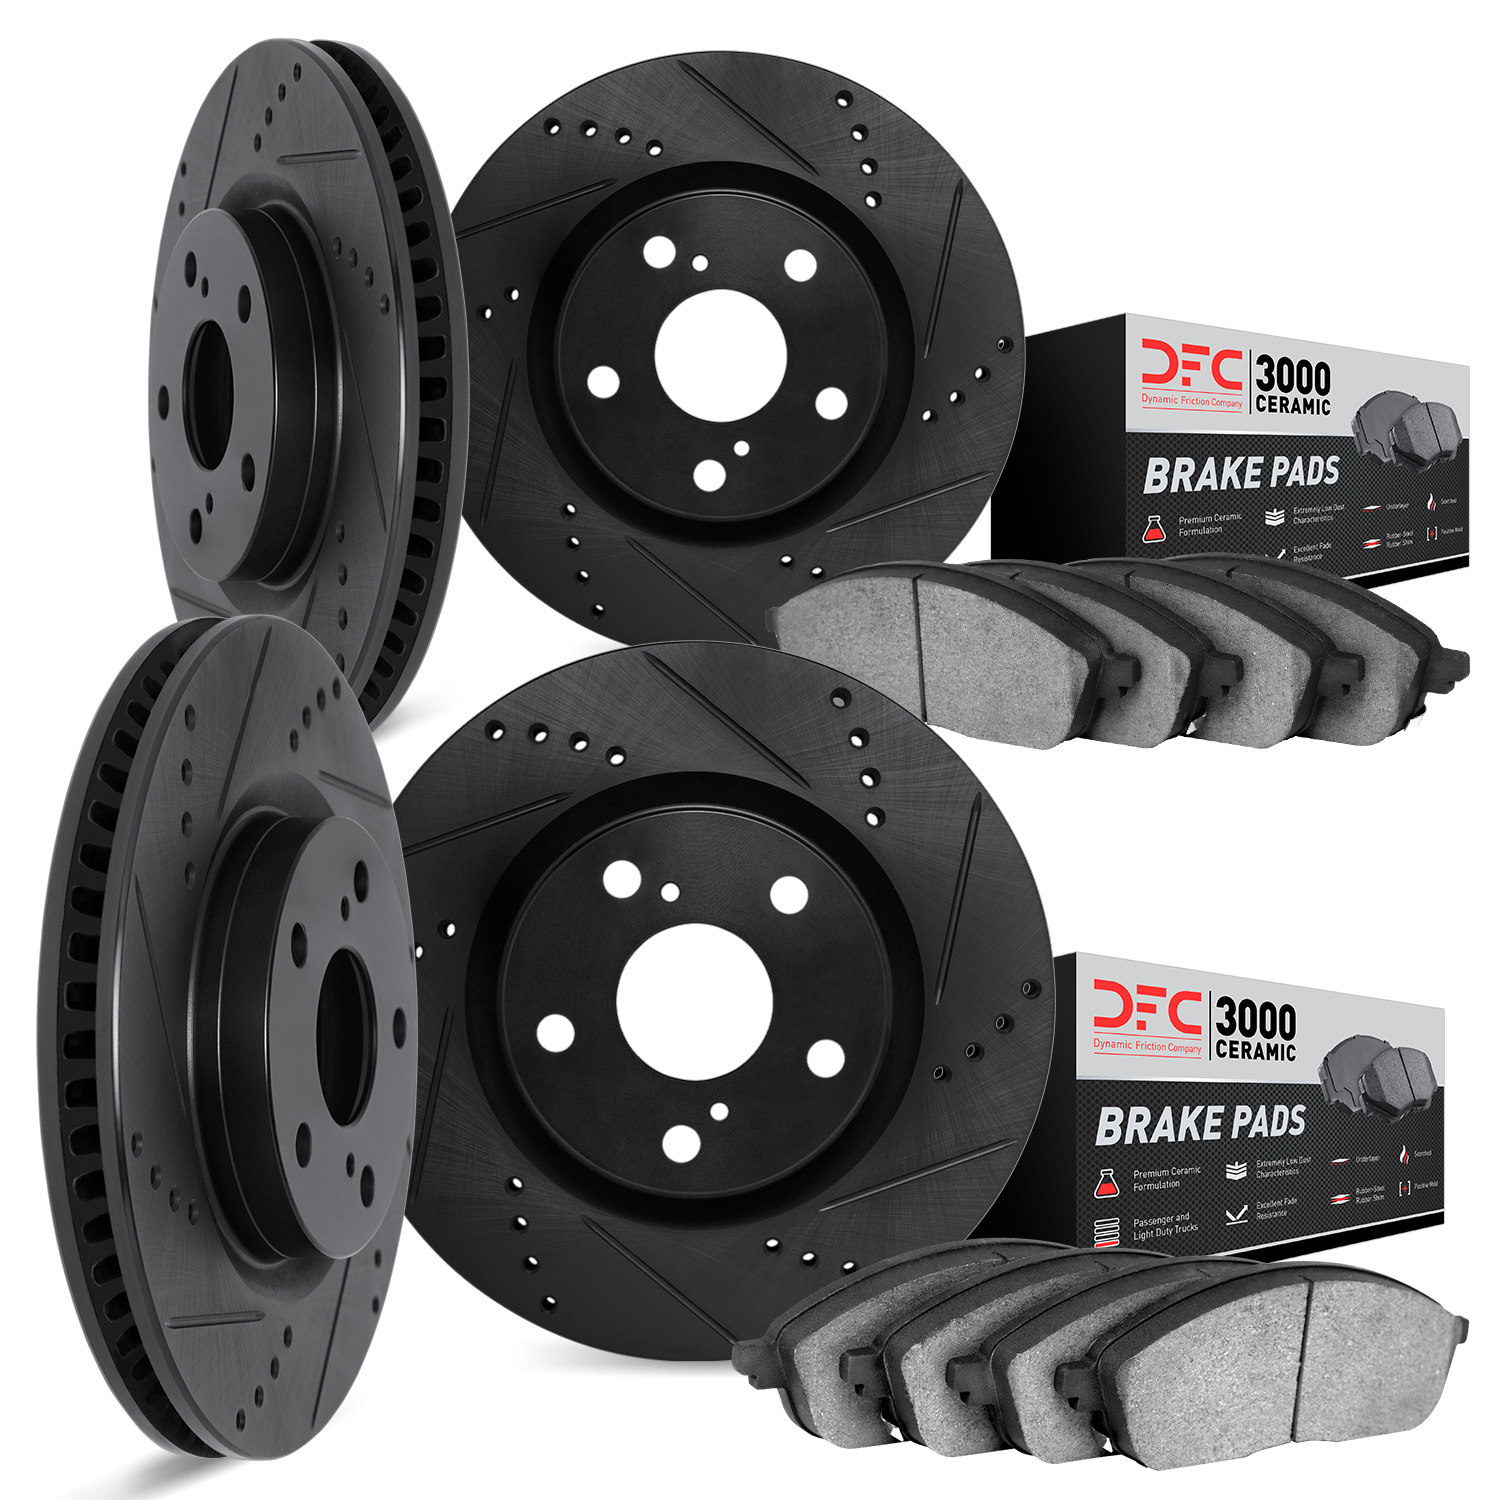 8304-31069 Drilled/Slotted Brake Rotors with 3000-Series Ceramic Brake Pads Kit [Black], 2007-2018 BMW, Position: Front and Rear